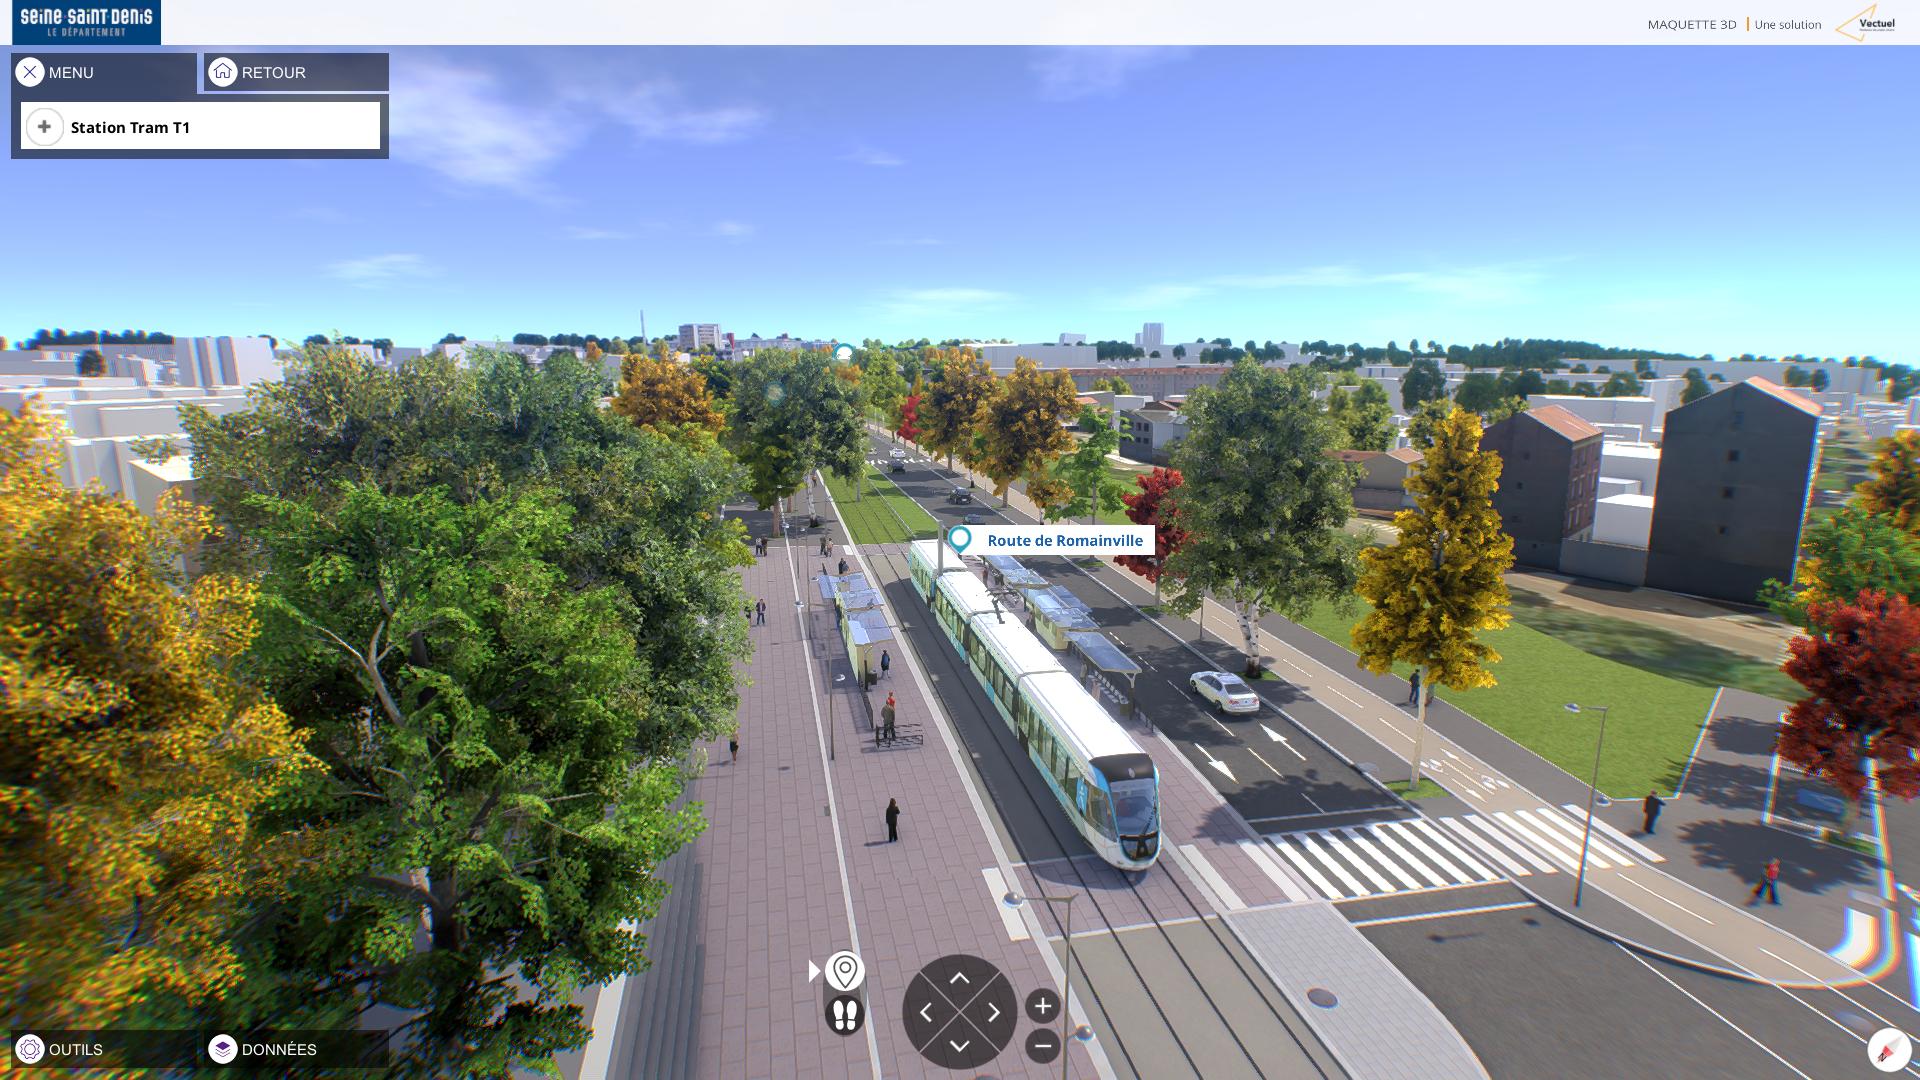 Station tram in Paris 3D image made with Unity